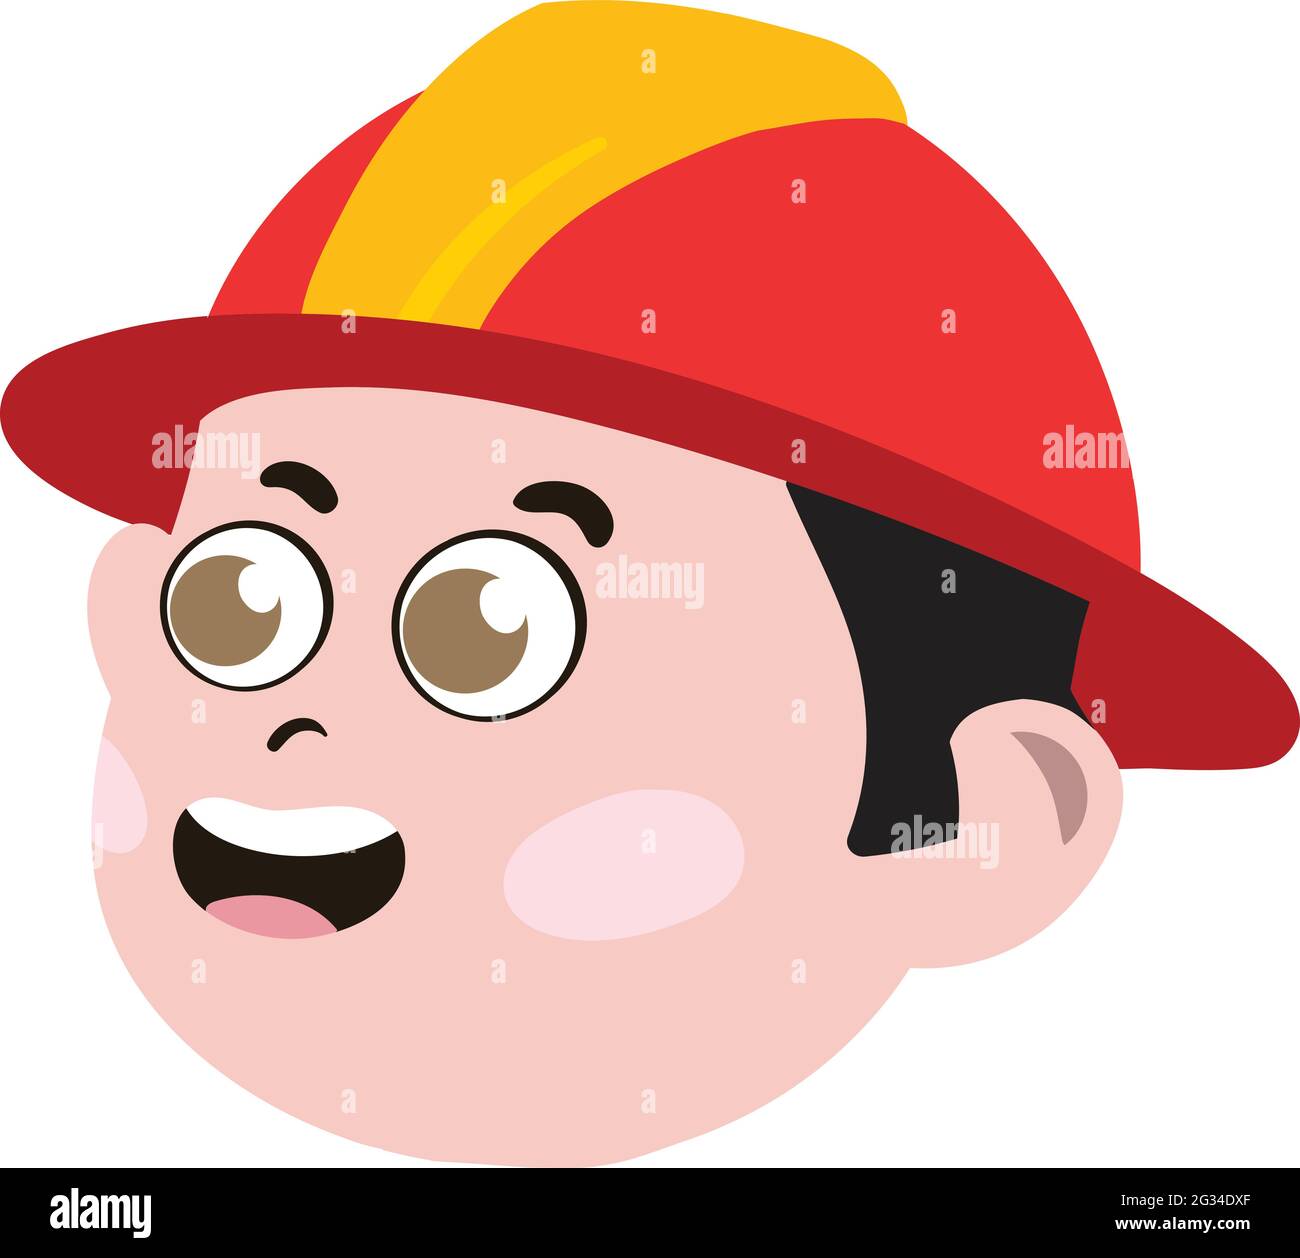 Cute kid Face. Cute and Adorable White Kid with dressed as Fire Fighter. Cute Face with Red Fire Fighter Hard Hat. Smiling Face. Happy Face. Stock Vector